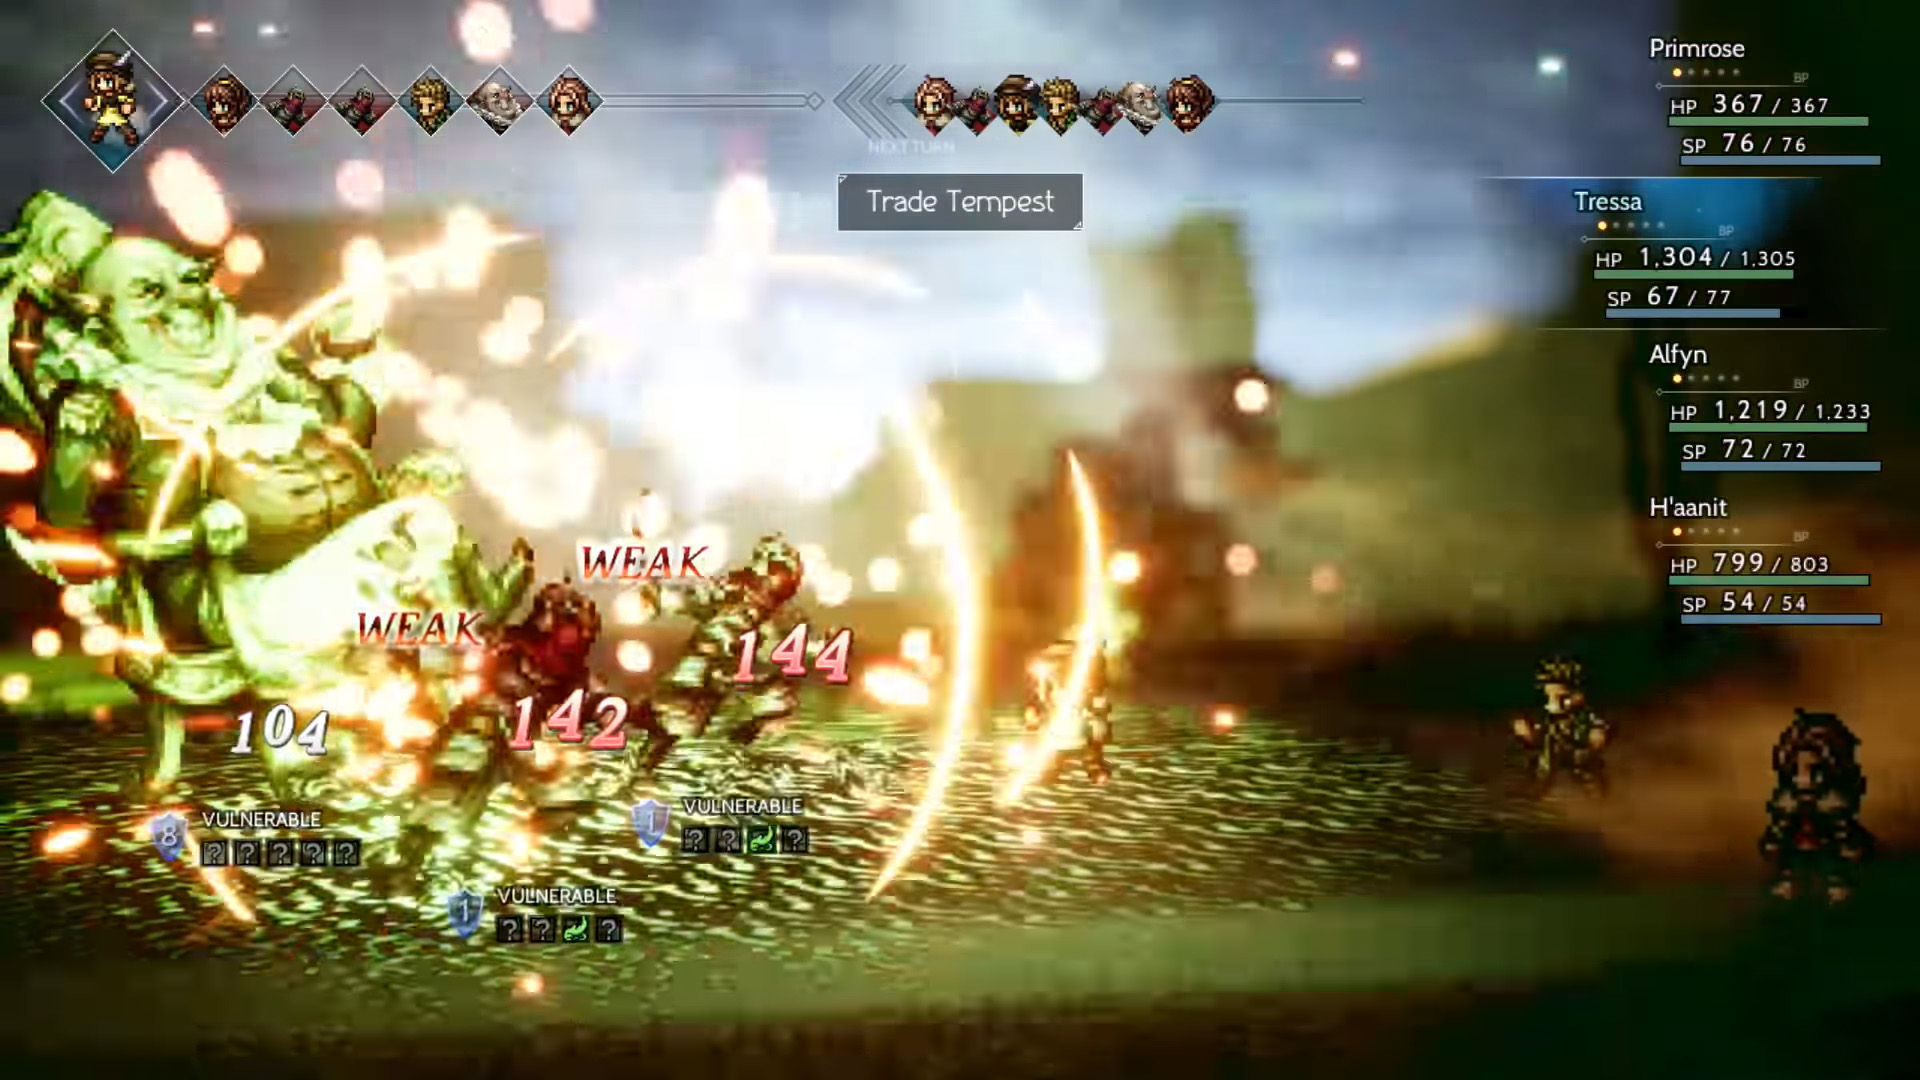 New Octopath Traveler project announced for iOS and Android